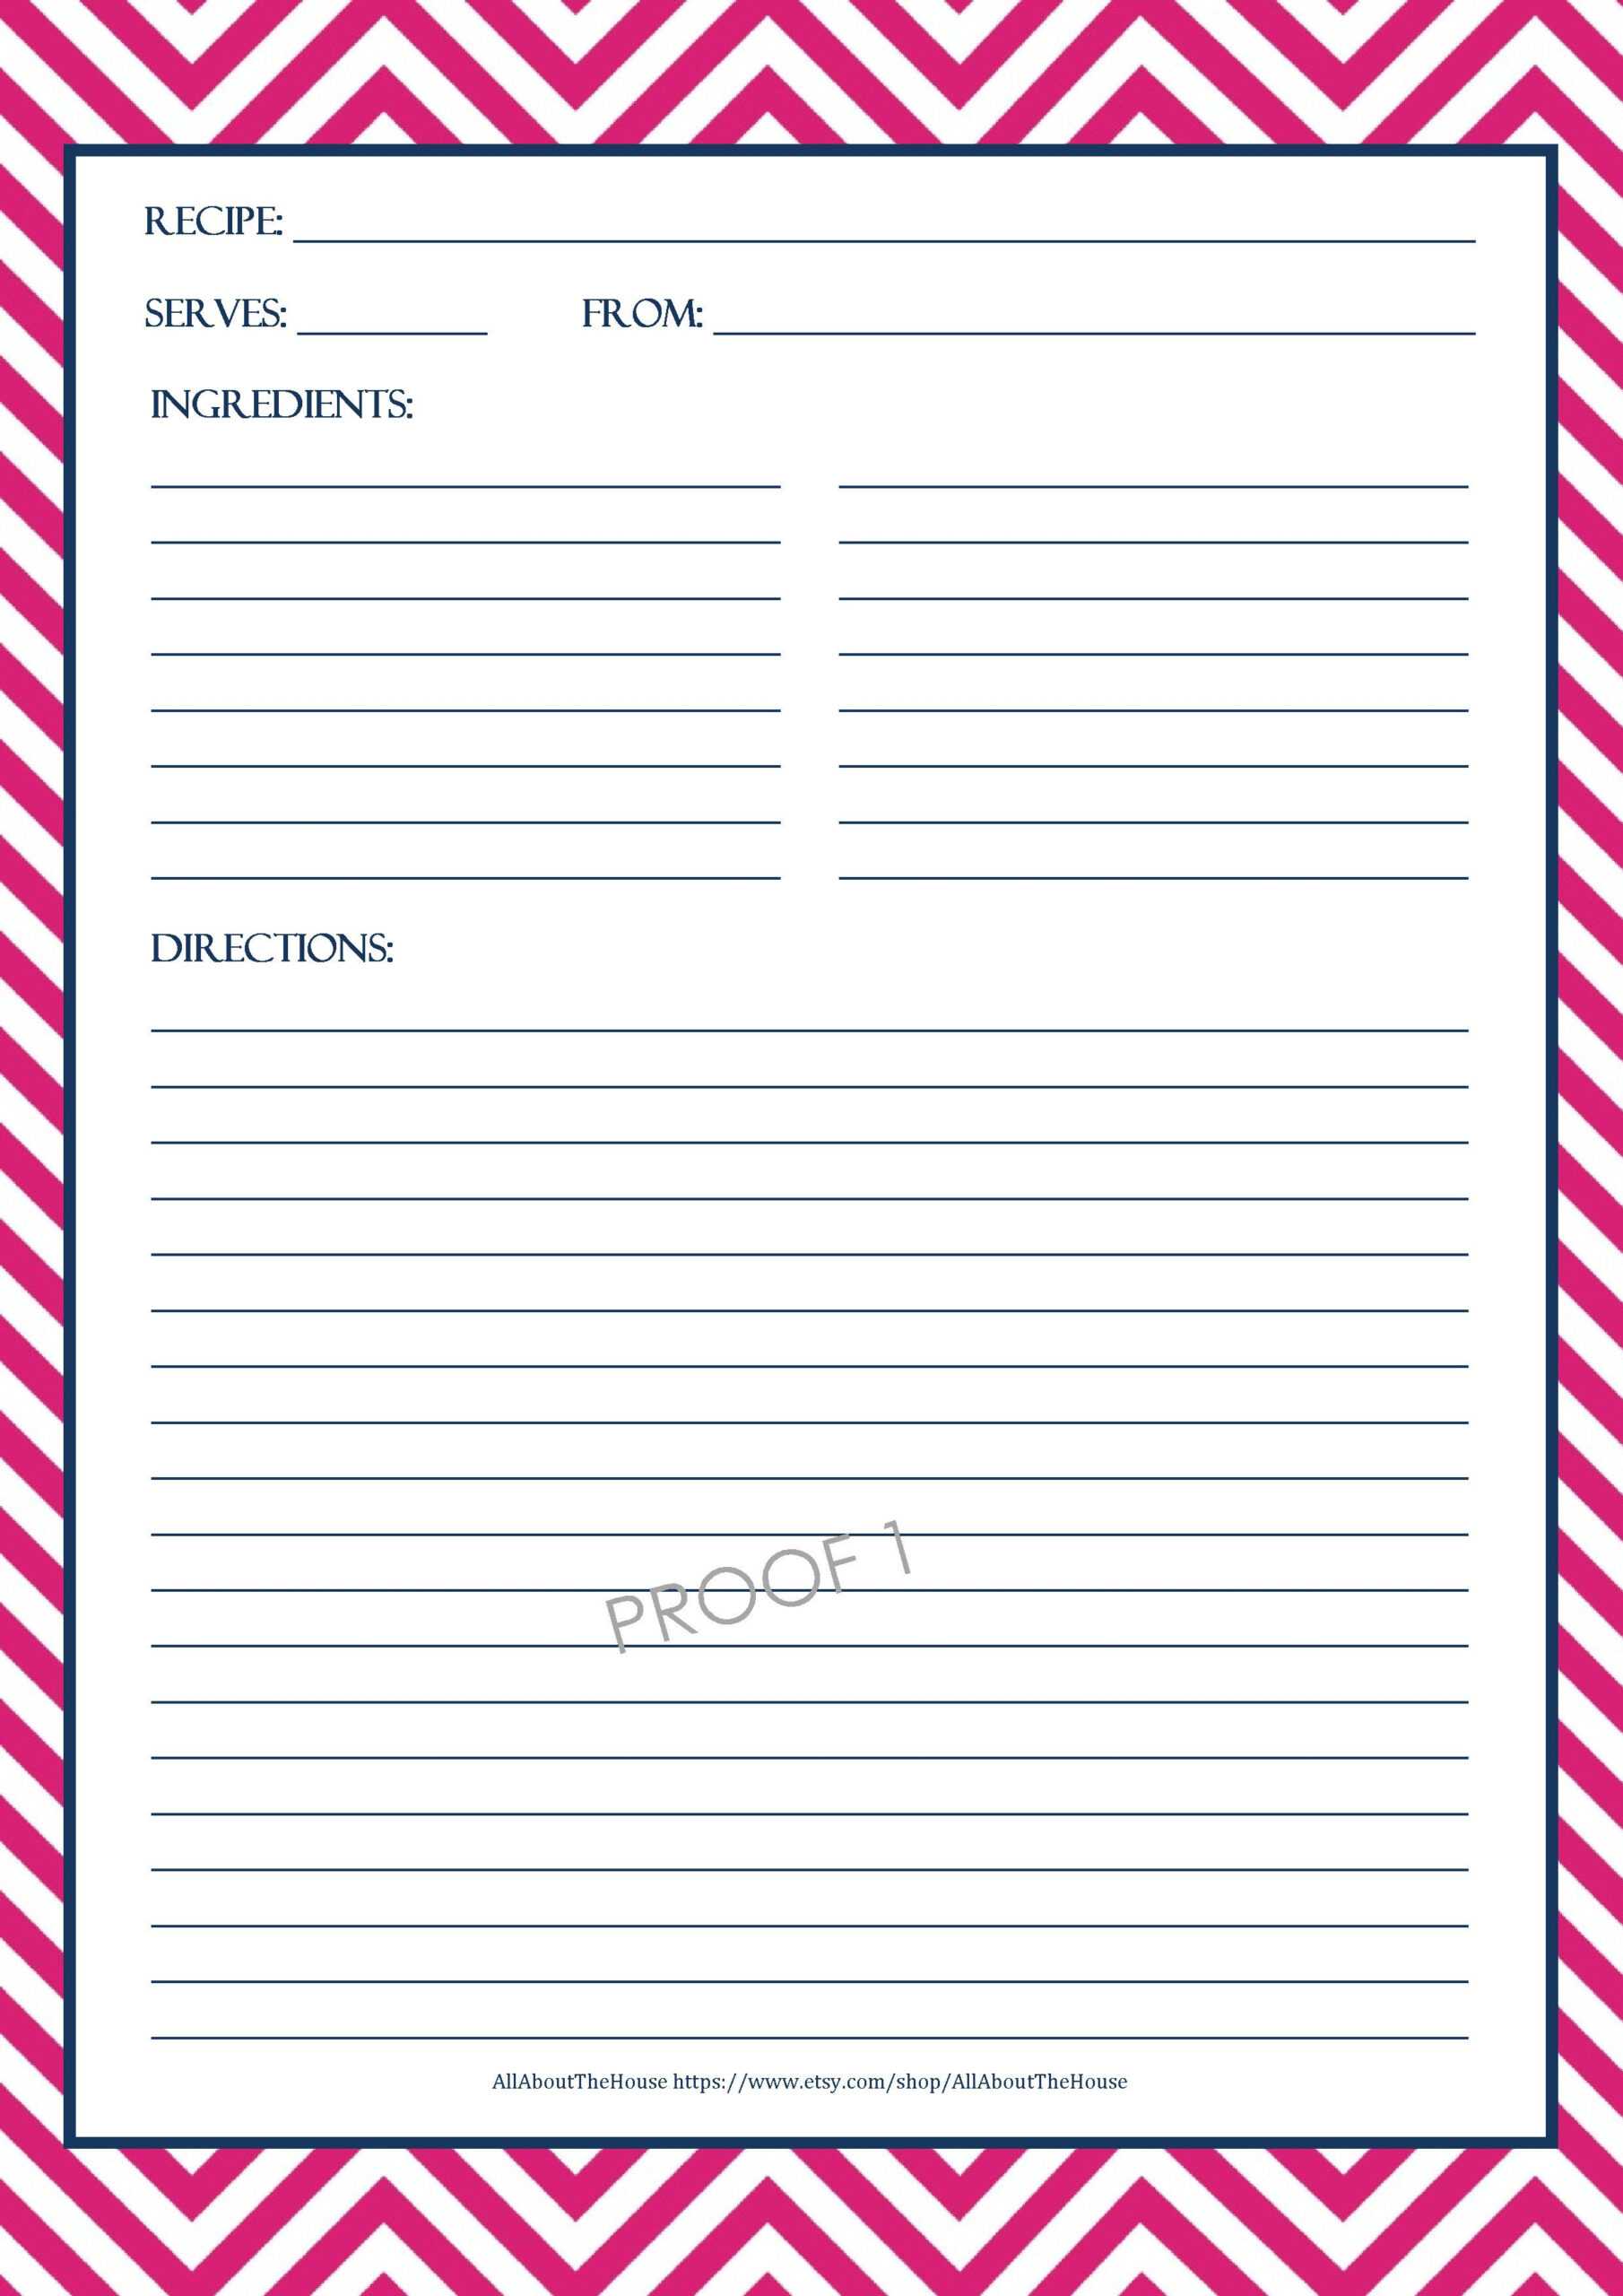 024 Recipe Card Template For Word Free Ideas Unbelievable Intended For Microsoft Word Recipe Card Template